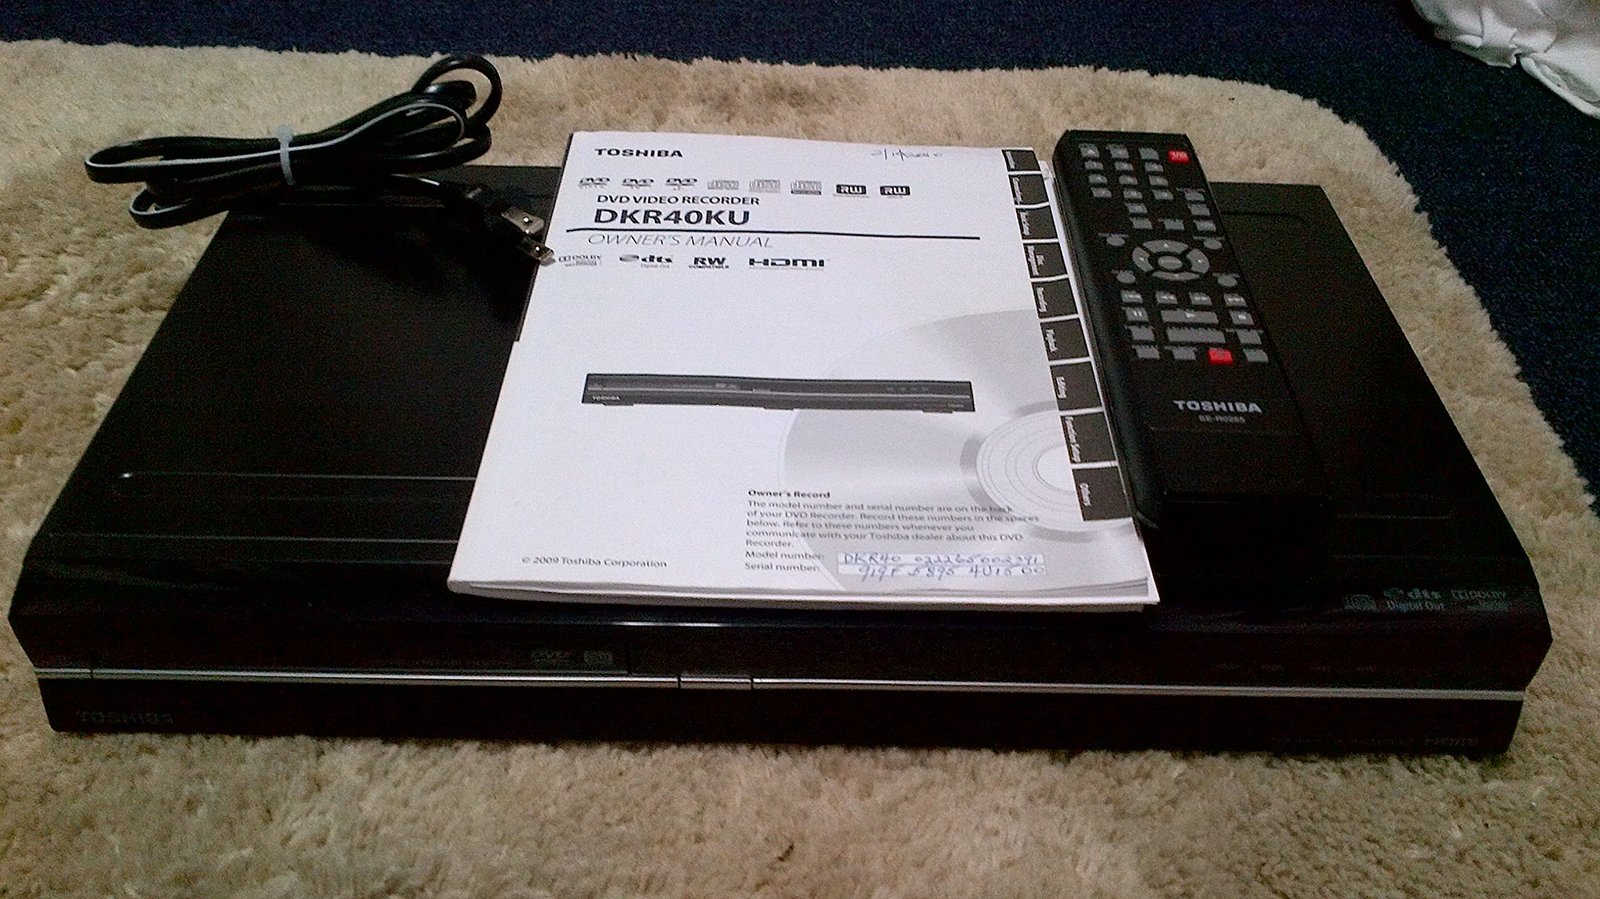 Toshiba DKR40 DVD Recorder with 1080p Upconversion - $435.55